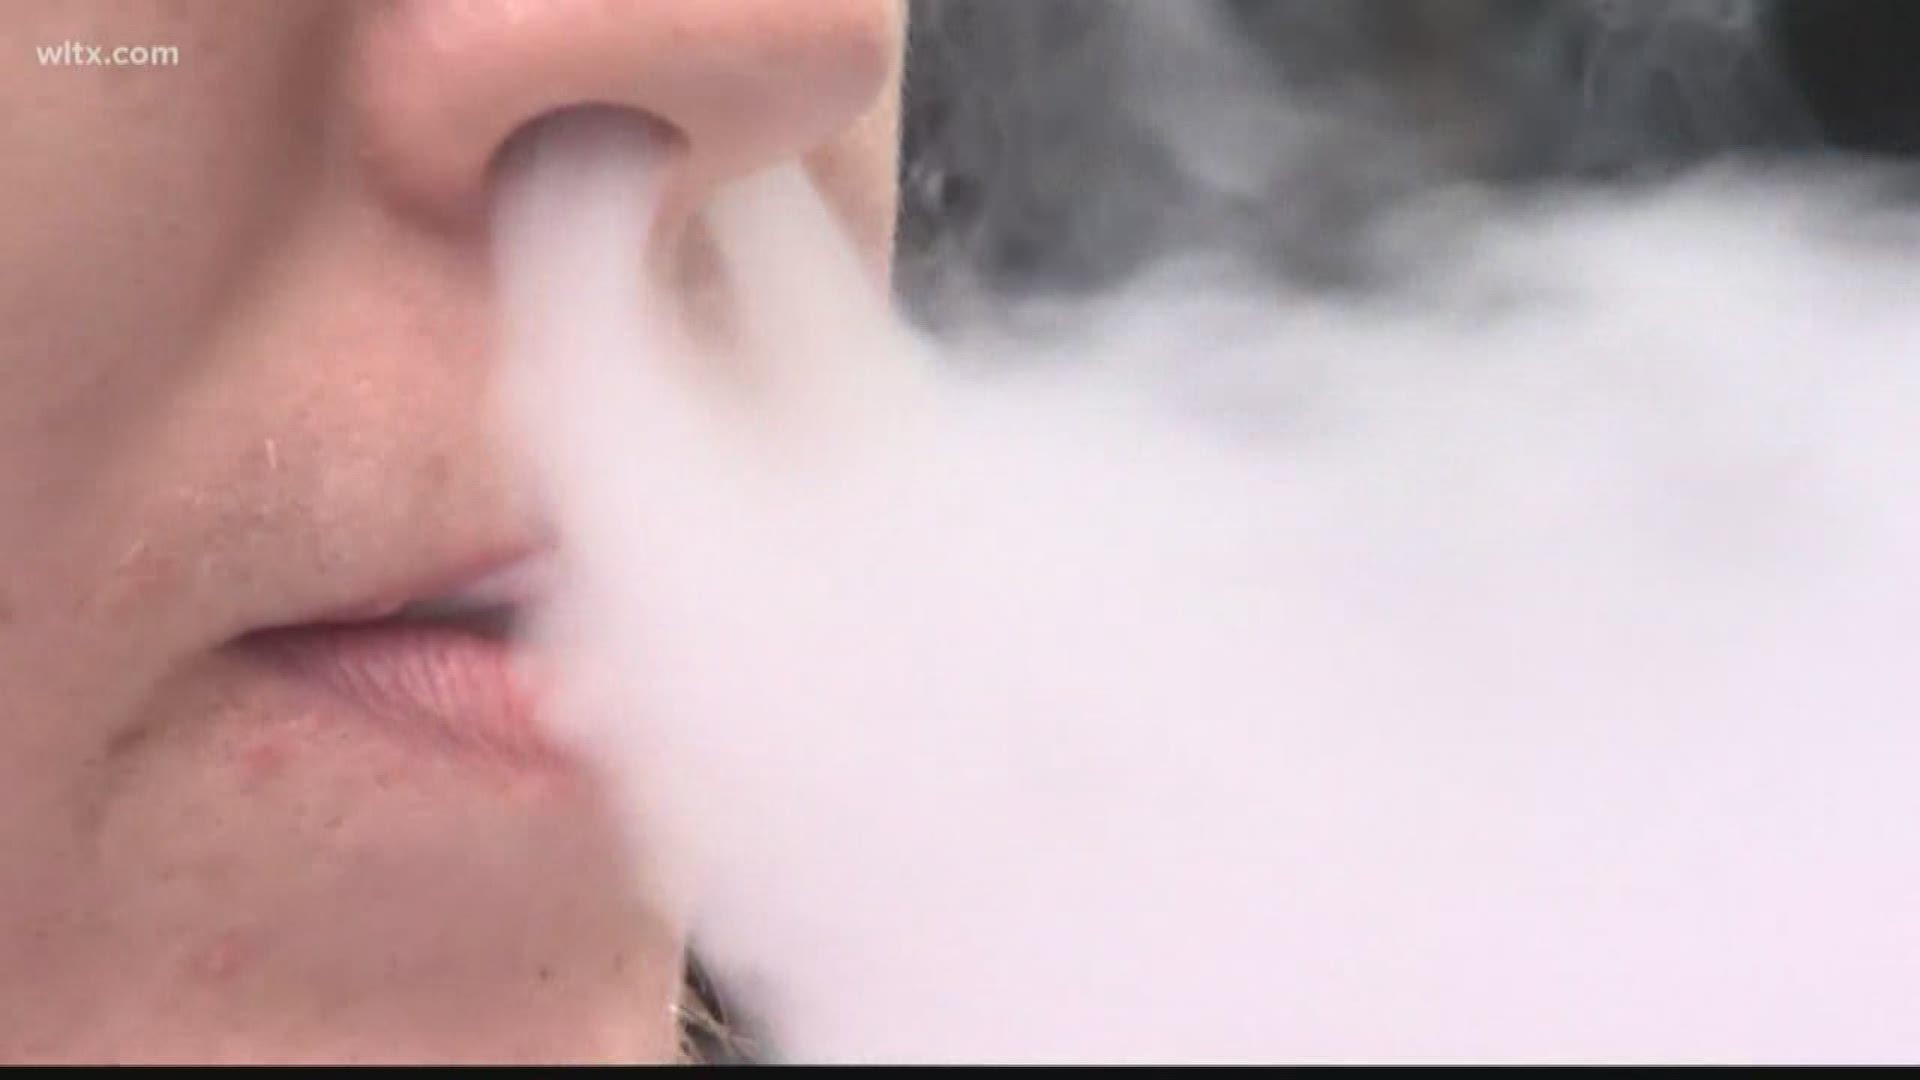 Doctors recently performed a double lung transplant on a 17-year-old patient, whose lungs were damaged after vaping